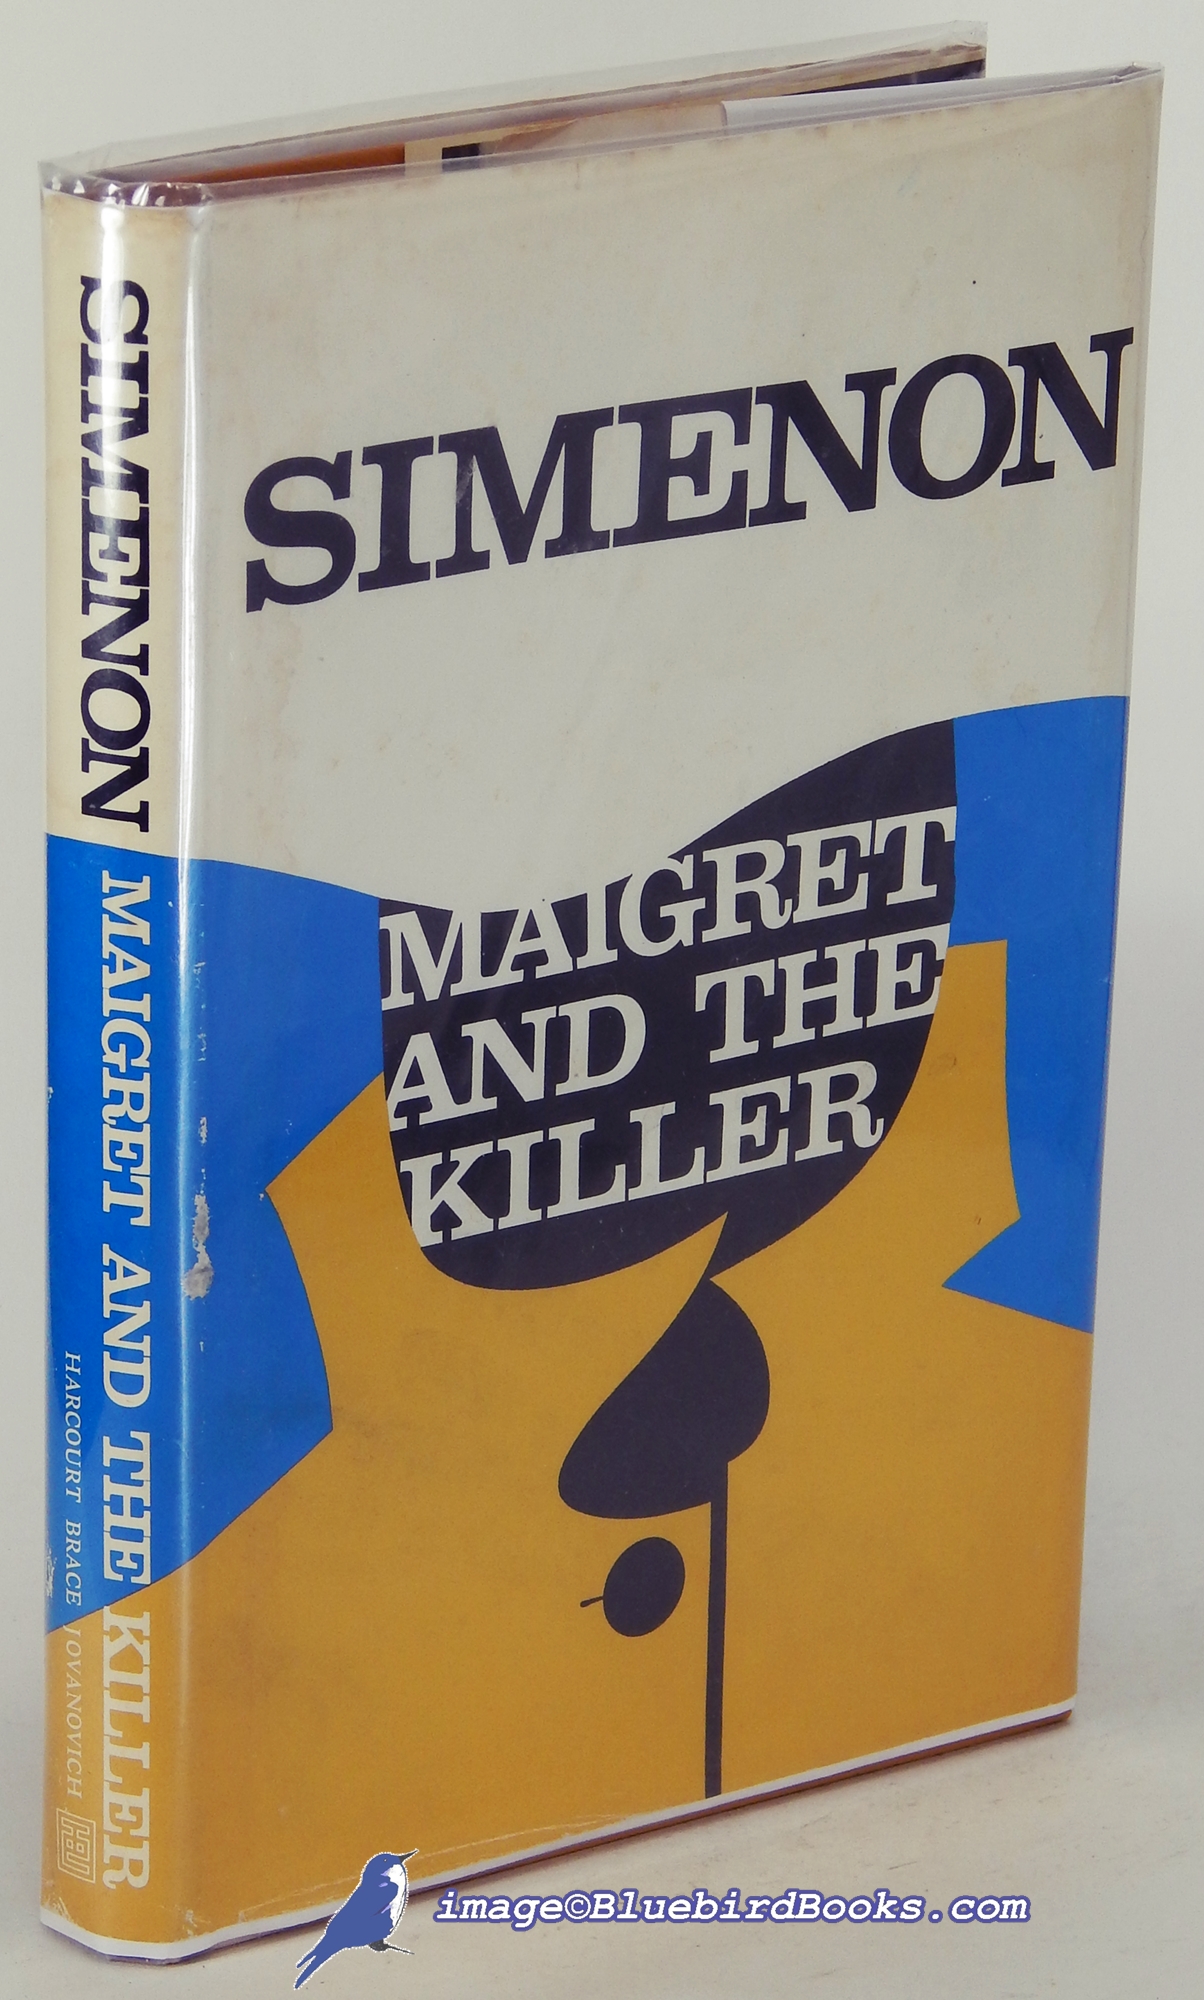 SIMENON, GEORGES - Maigret and the Killer